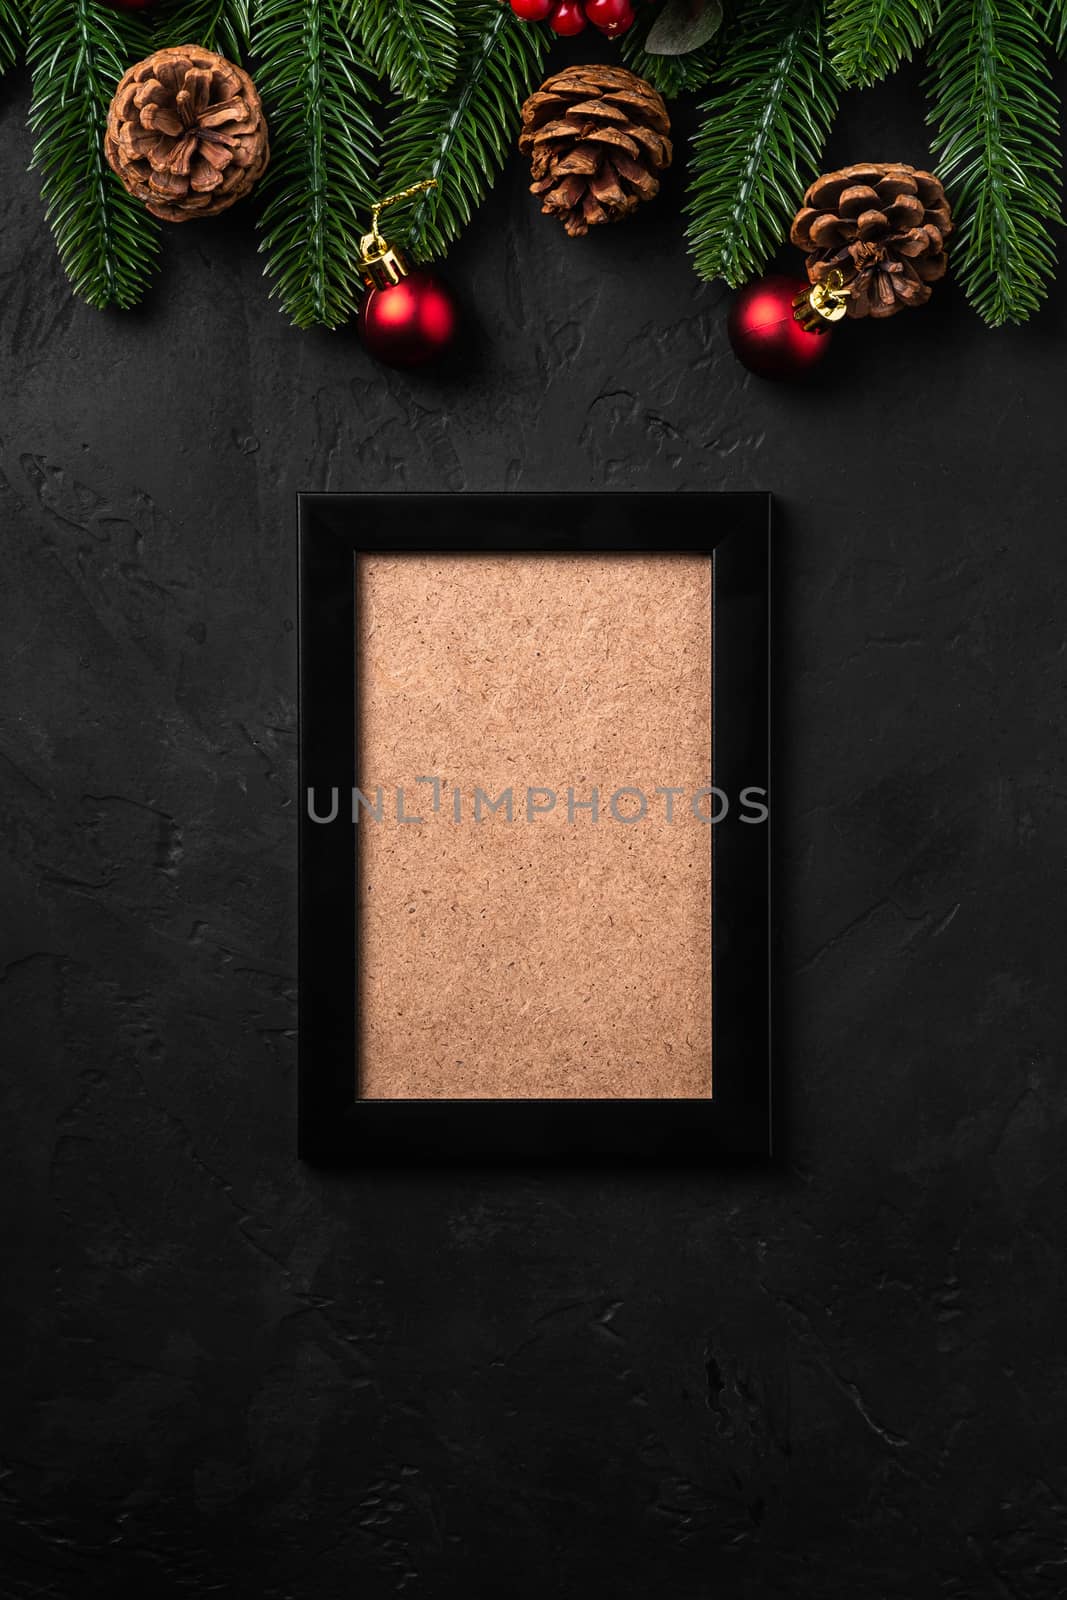 Christmas composition with empty picture frame. Colorful ornament, pine cones and fir needles decorations. Mock up greetings card template